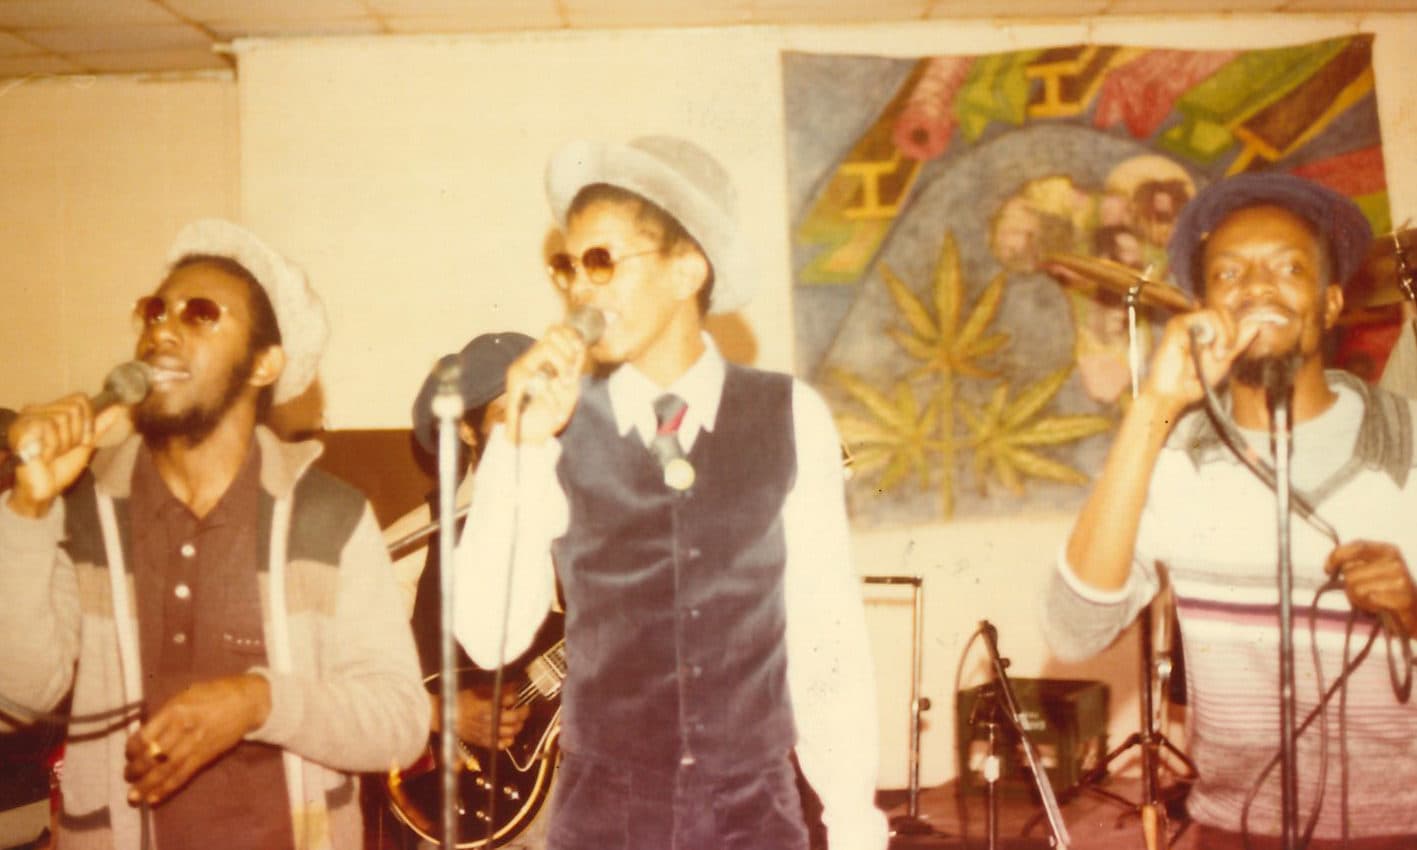 Courtney Morris, Lenky Roy and Errol Strengh (Courtesy Cultures of Soul Record)